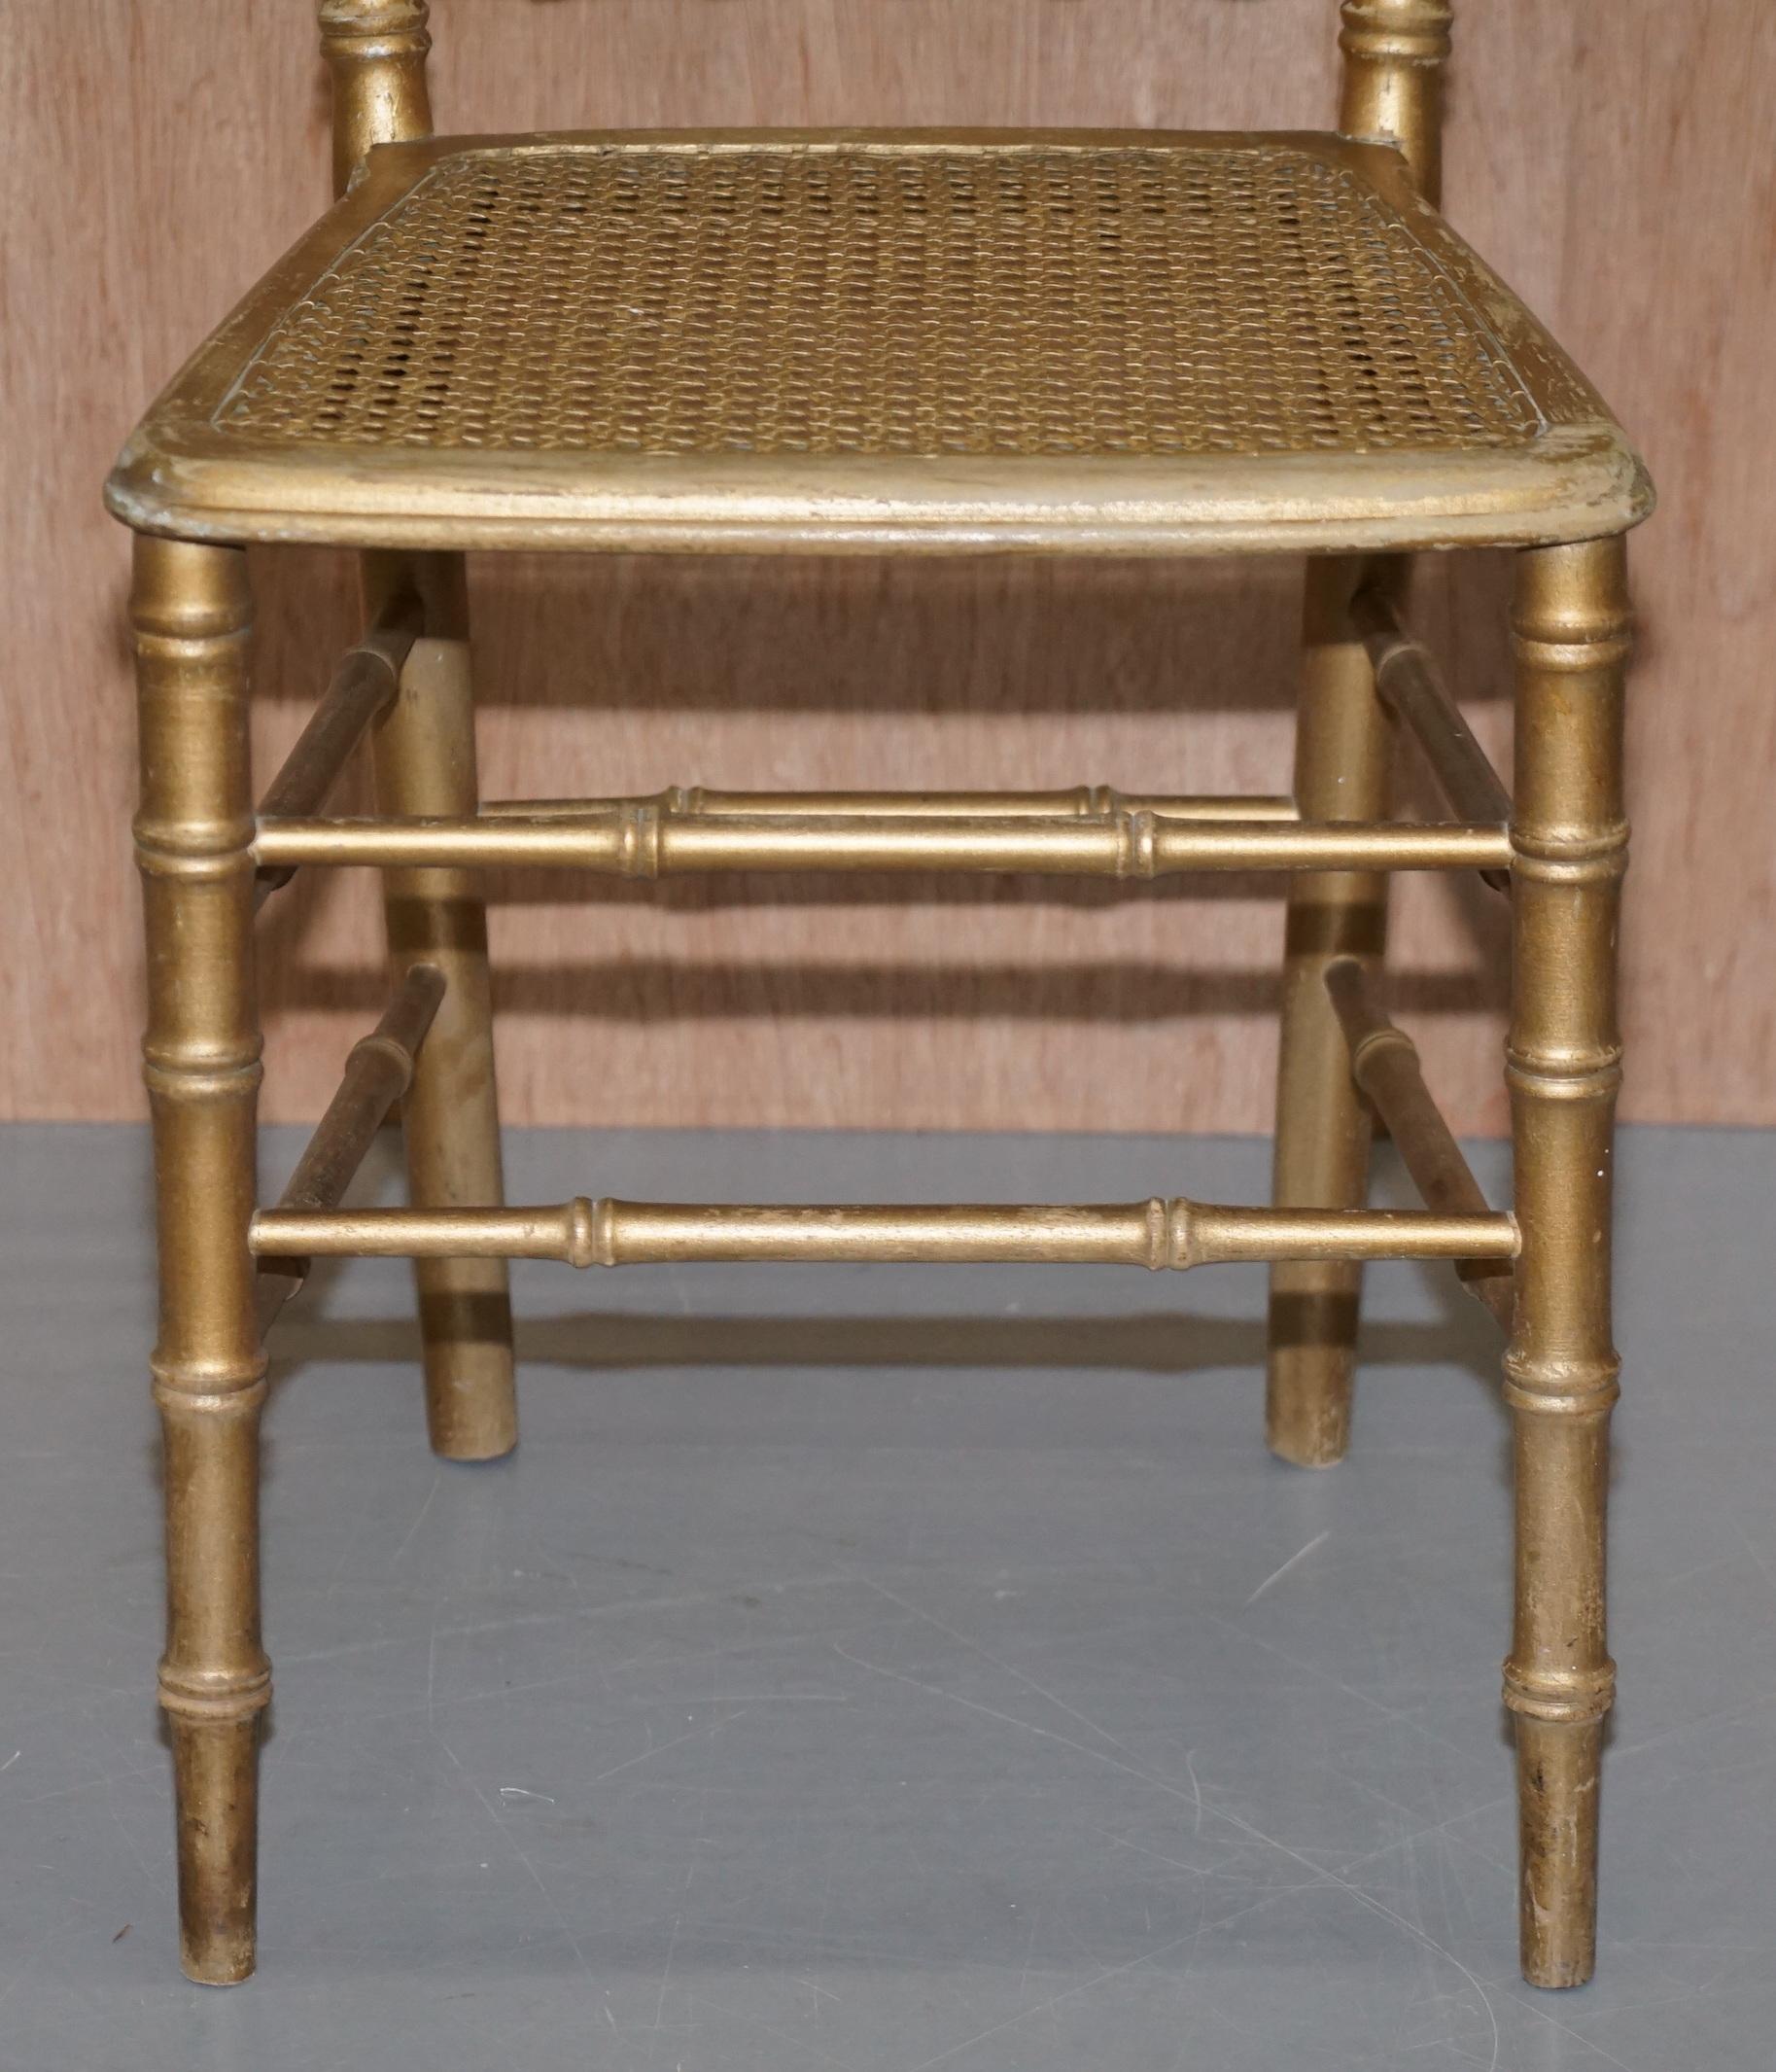 Early 20th Century Edwardian Giltwood Famboo Regency Style Berger Chair with Newly Gold Giilt Frame For Sale